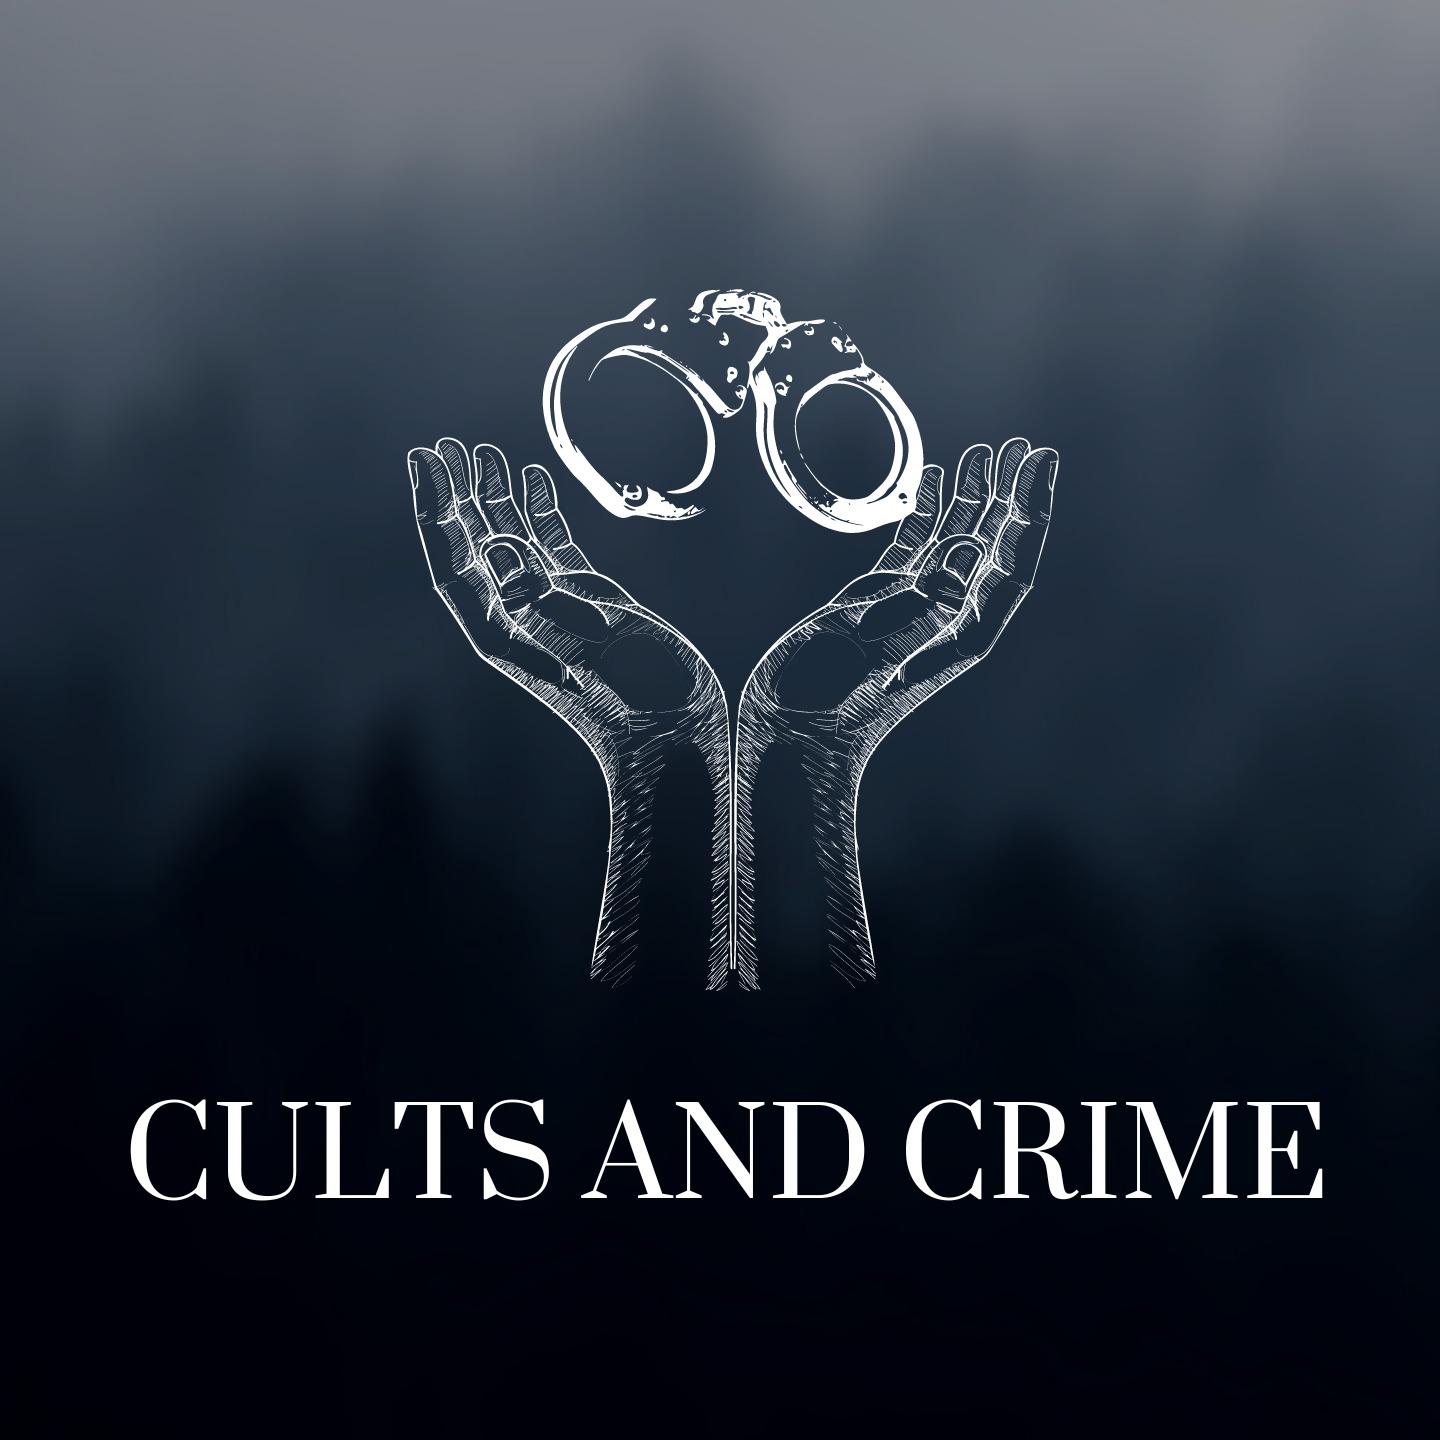 Cults and Crime